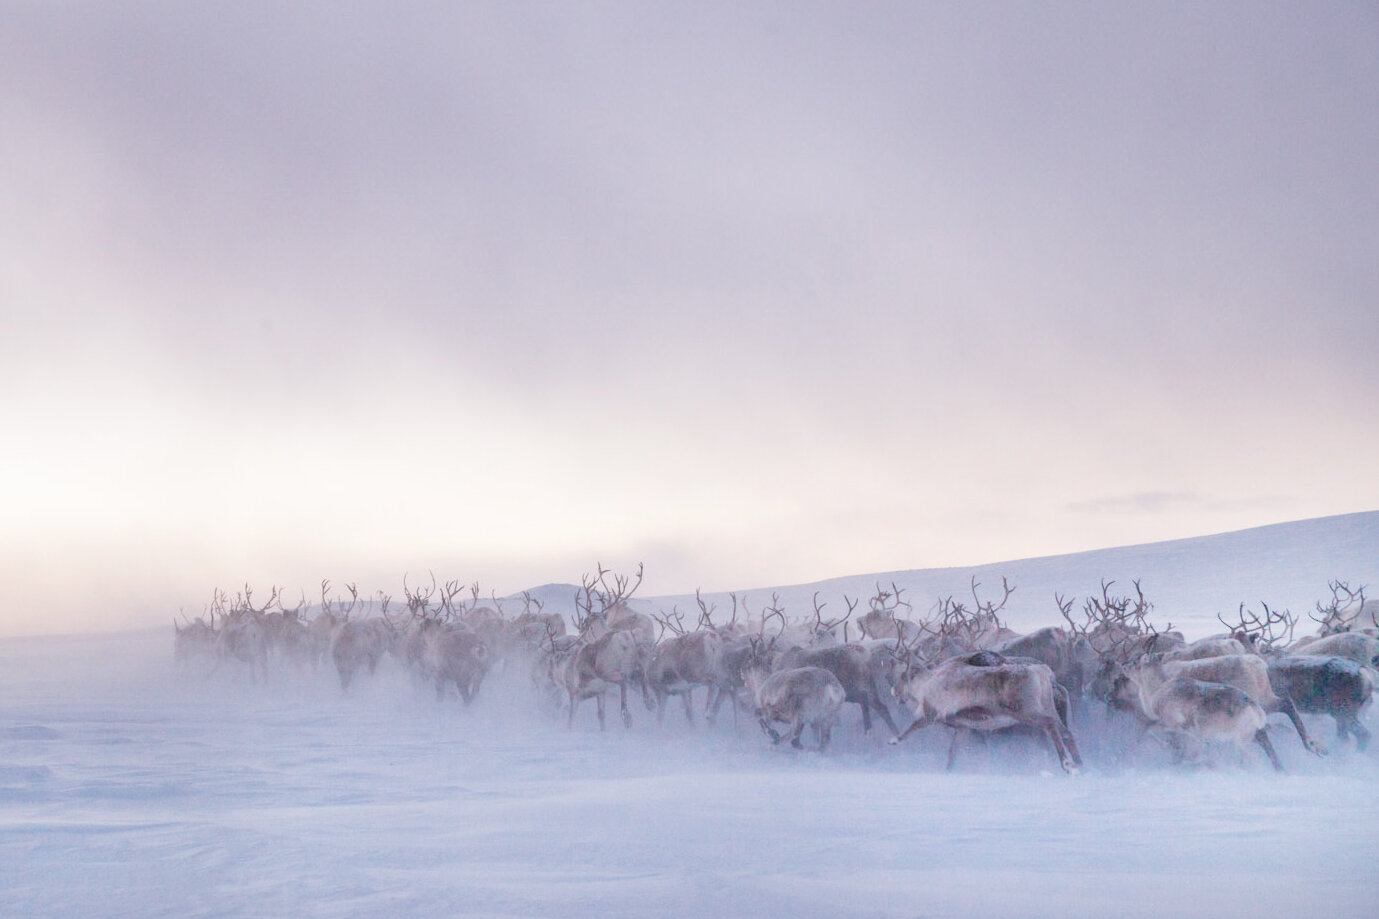  Rounding up the herd to the selection fences where they are selected for slaughter. With climate changes it´s becoming alot harder to plan for the seasons. Mild weather in winter can cause frozen ground which makes it difficult for the reindeer to d